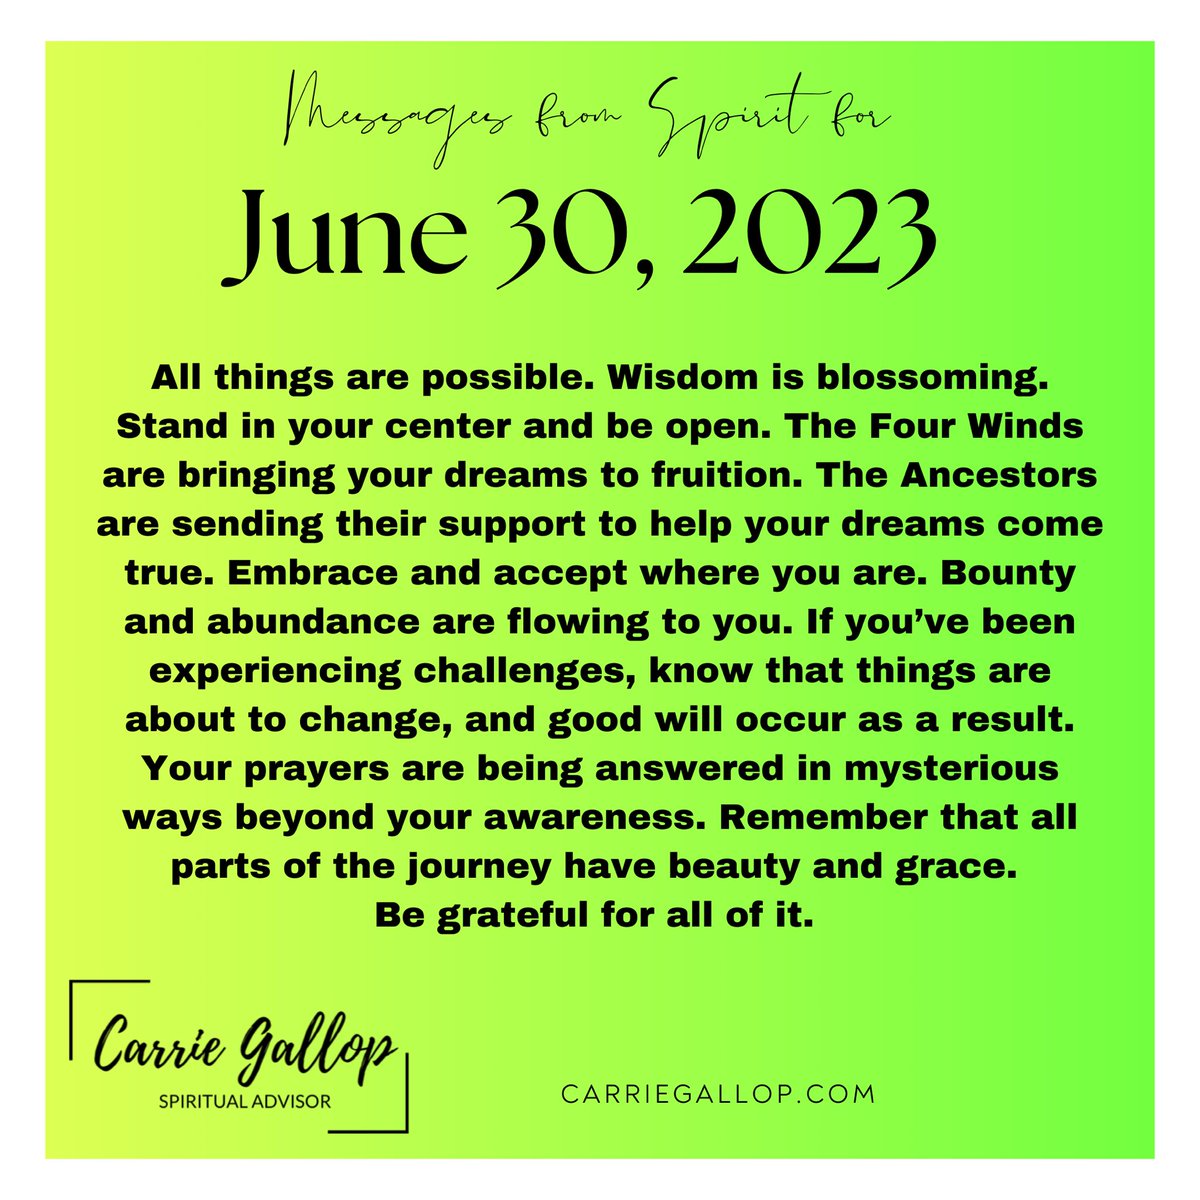 Messages From Spirit for June 30, 2023 ✨

#Daily #Guidance #Message #MessagesFromSpirit #June30 #AllThingsArePossible #Wisdom #Blossoming #Center #BeOpen #Dreams #Fruition #Ancestors #Support #Help #DreamsComeTrue #Embrace #Accept #Bounty #Abundance #Flowing #Challenges #Change